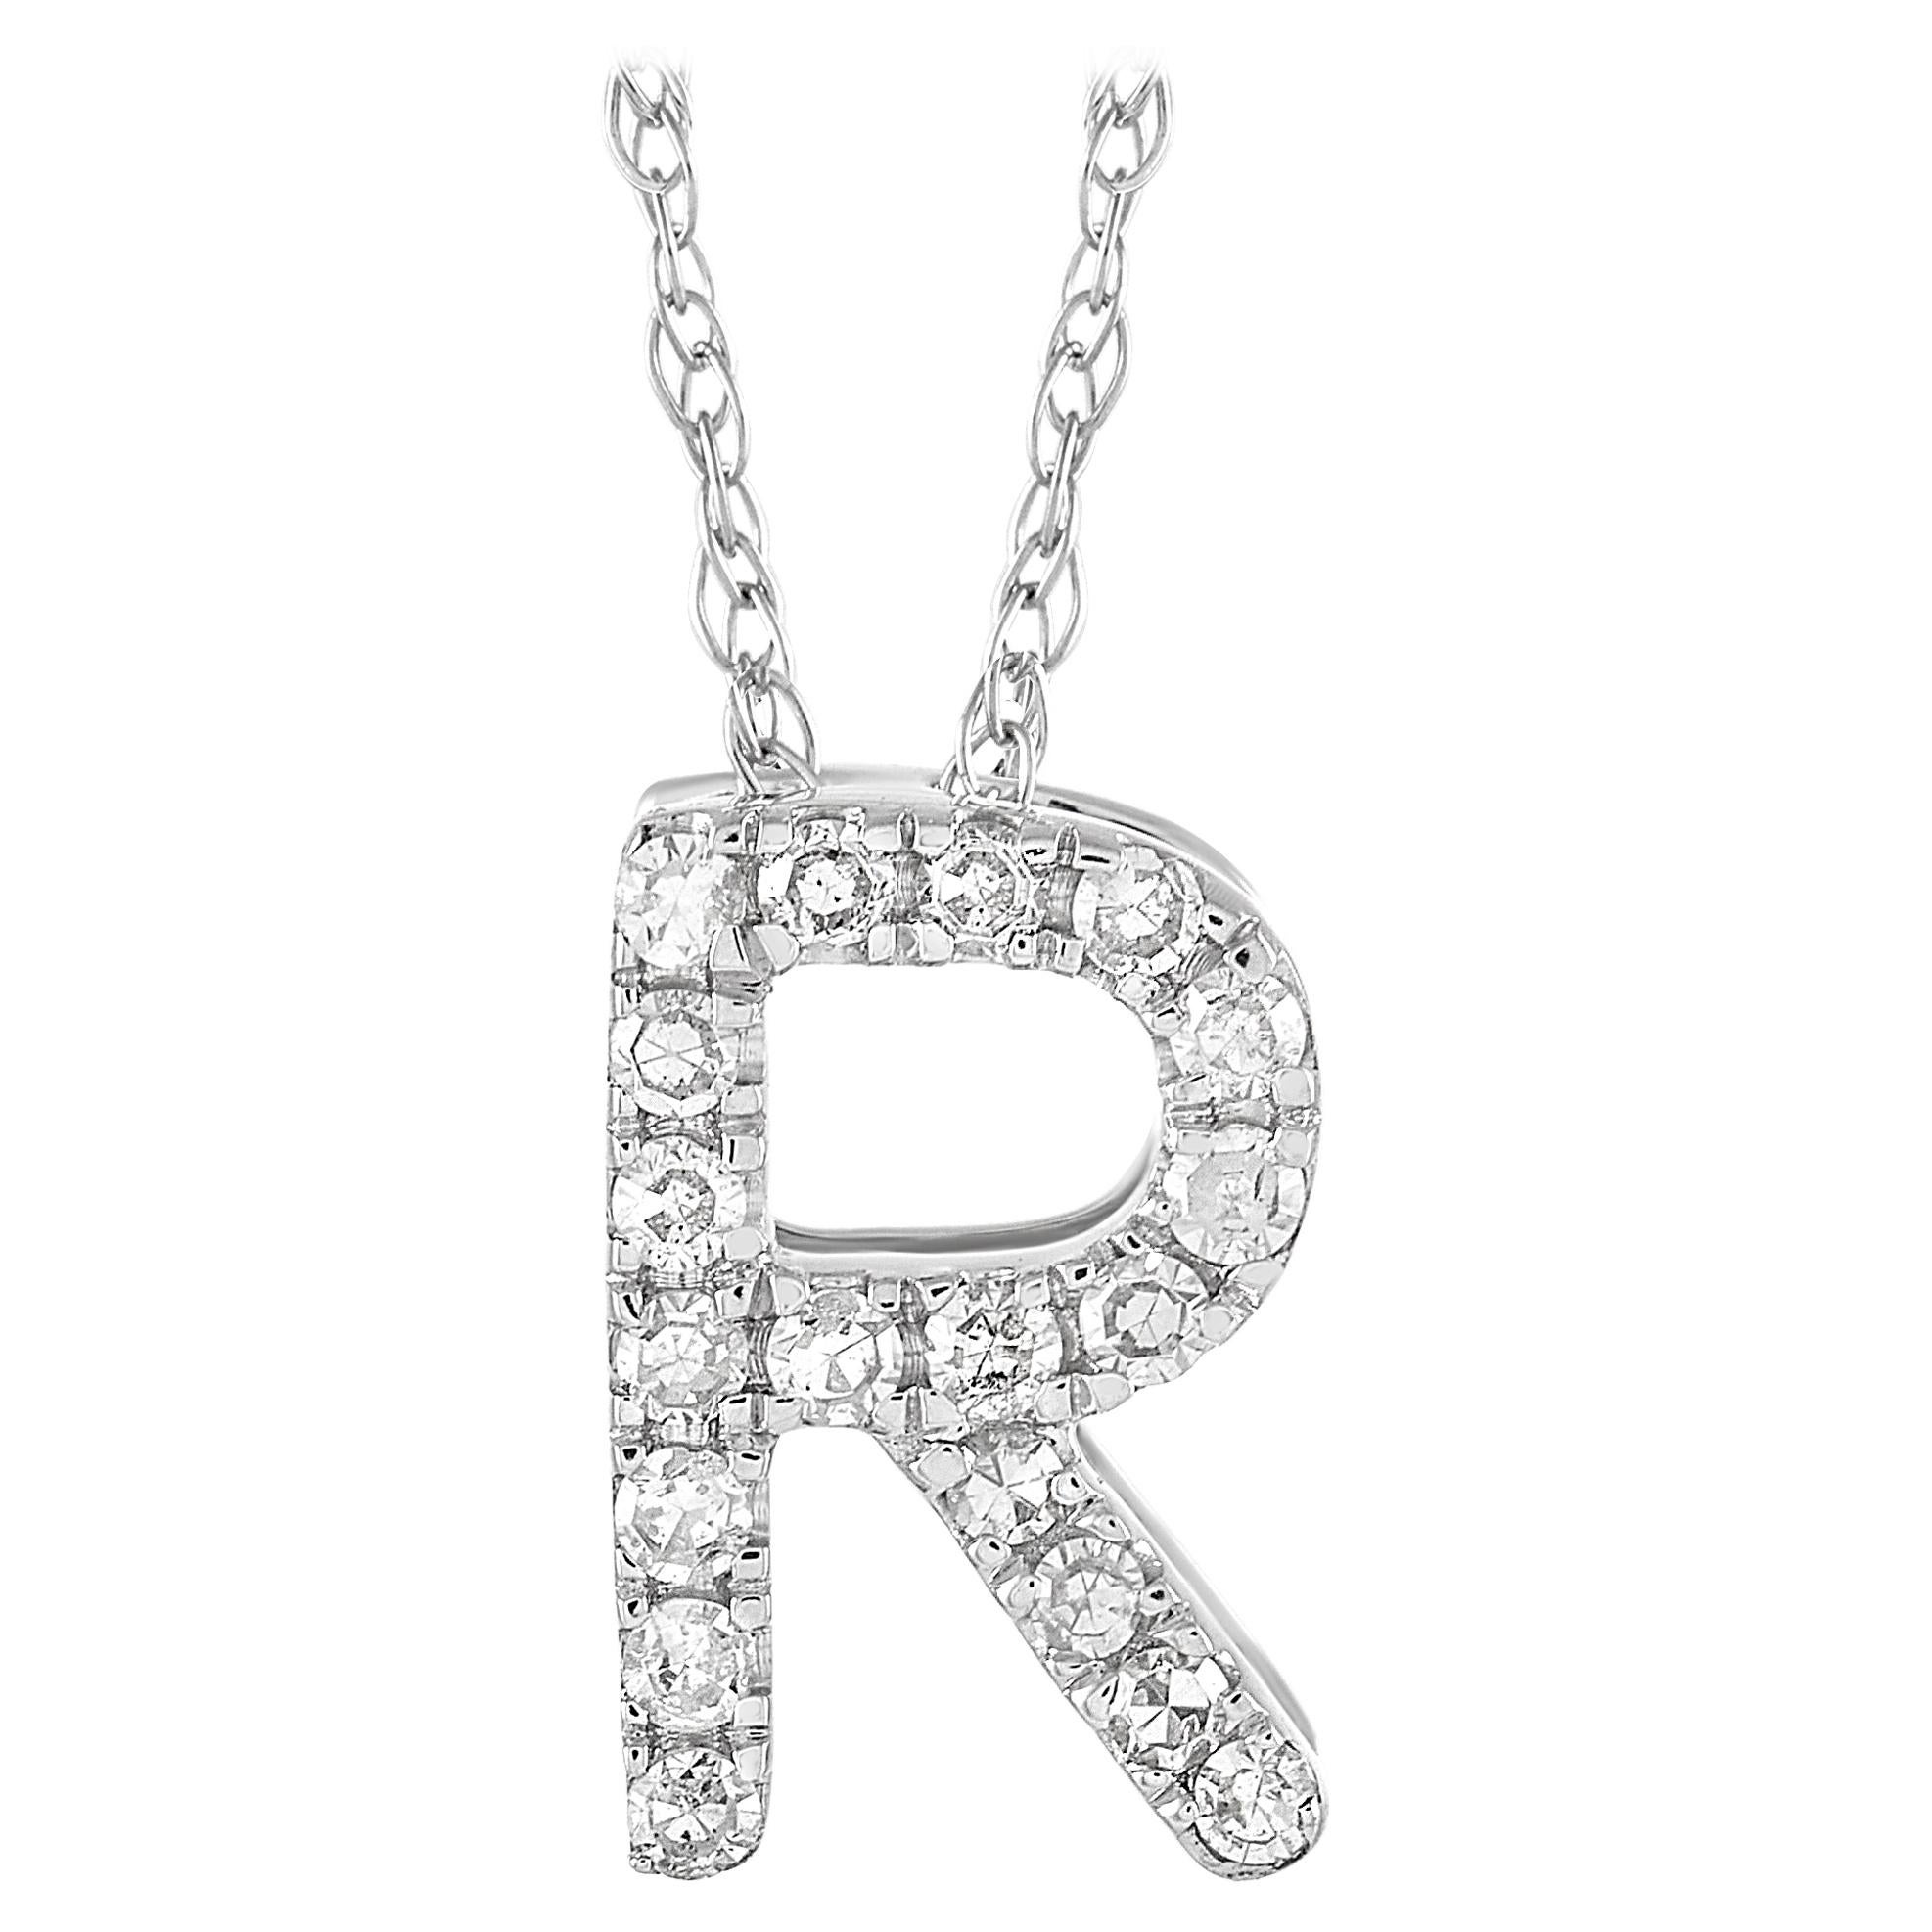 LB Exclusive 14K White Gold 0.10 Ct Diamond Initial ‘R’ Necklace